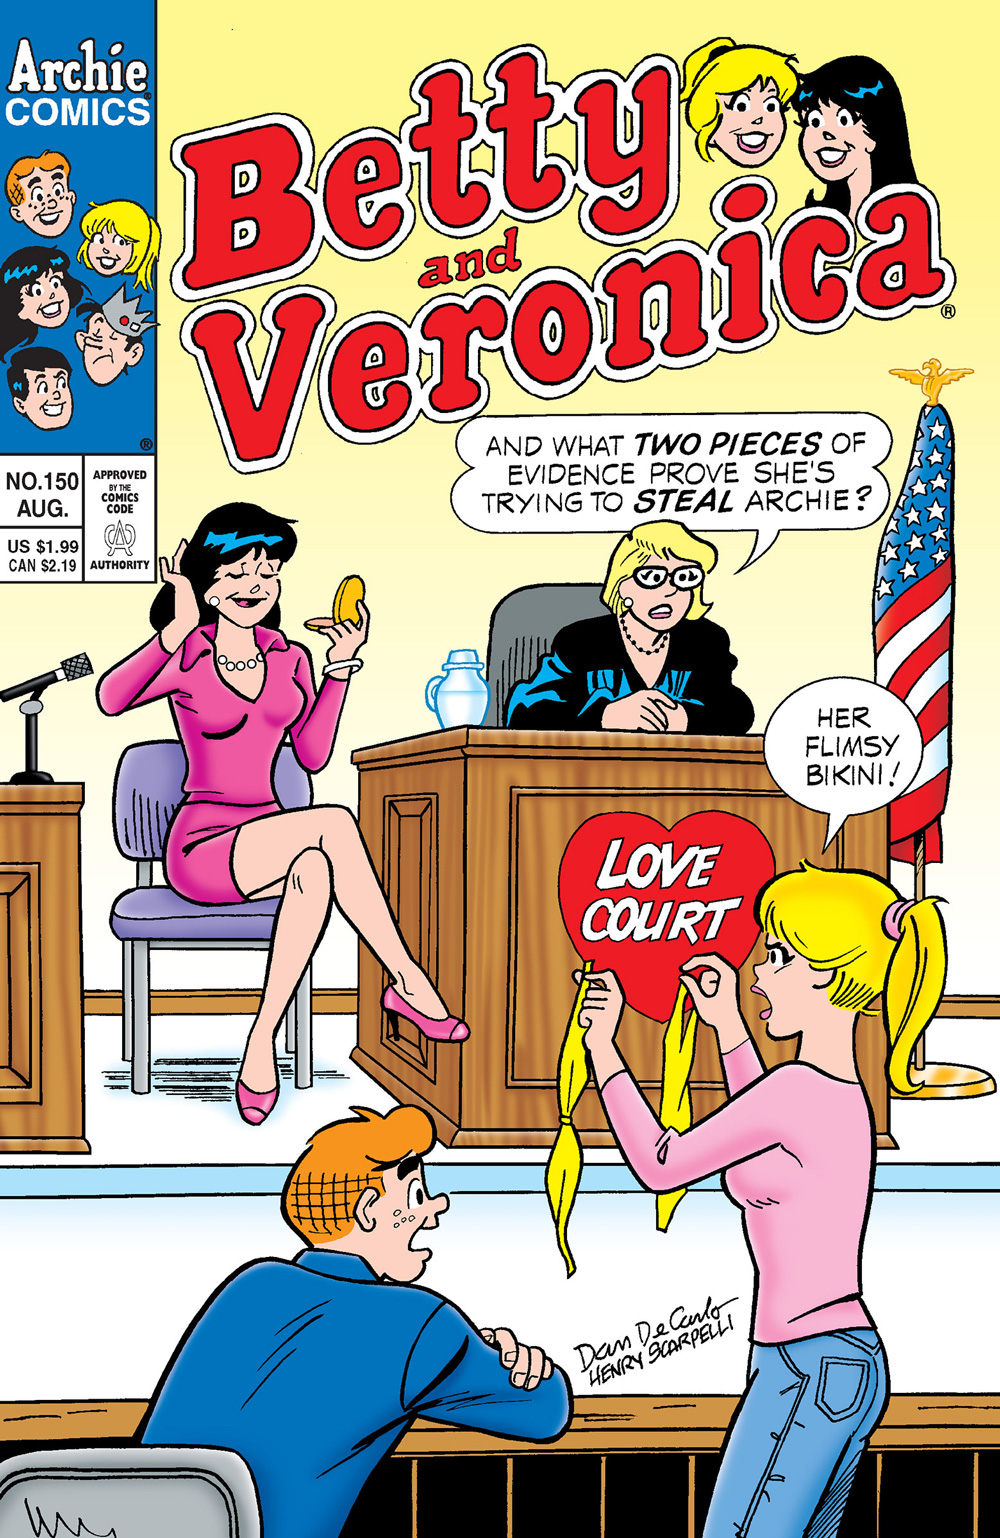 Veronica is on the witness stand next to a judge in a place called Love Court. Archie sits in the foreground while Betty stands up presenting her case like a lawyer. The judge asks Betty what evidence she has to prove that Veronica is trying to steal Archie. Betty, holding a yellow swimsuit, says her evidence is Veronica's flimsy bikini.